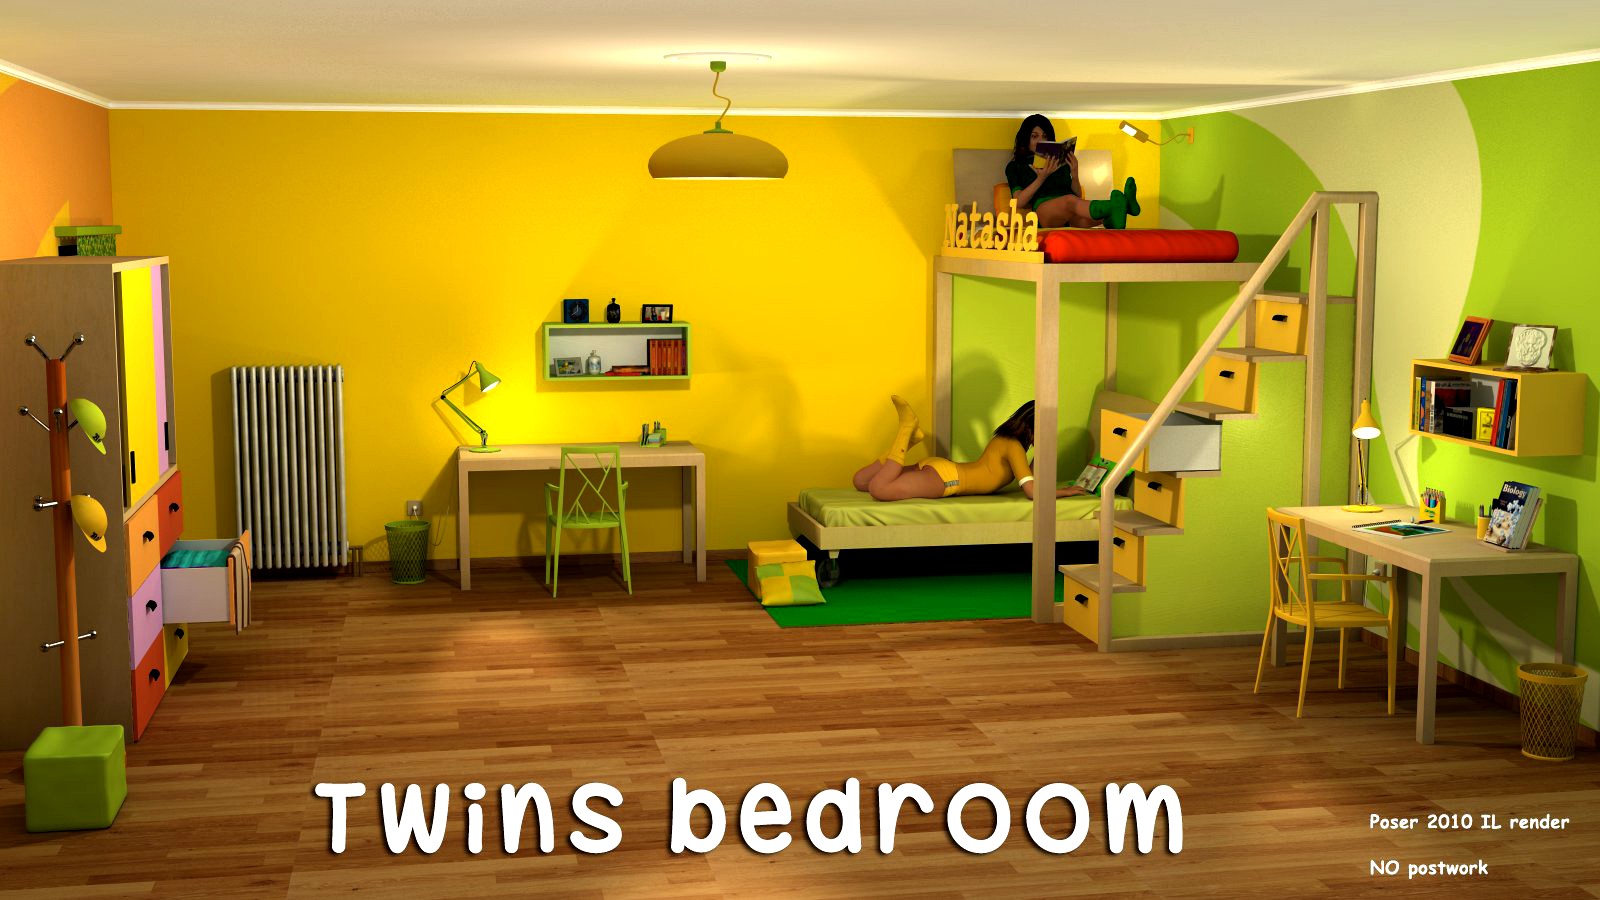 Twins bedroom - Extended License